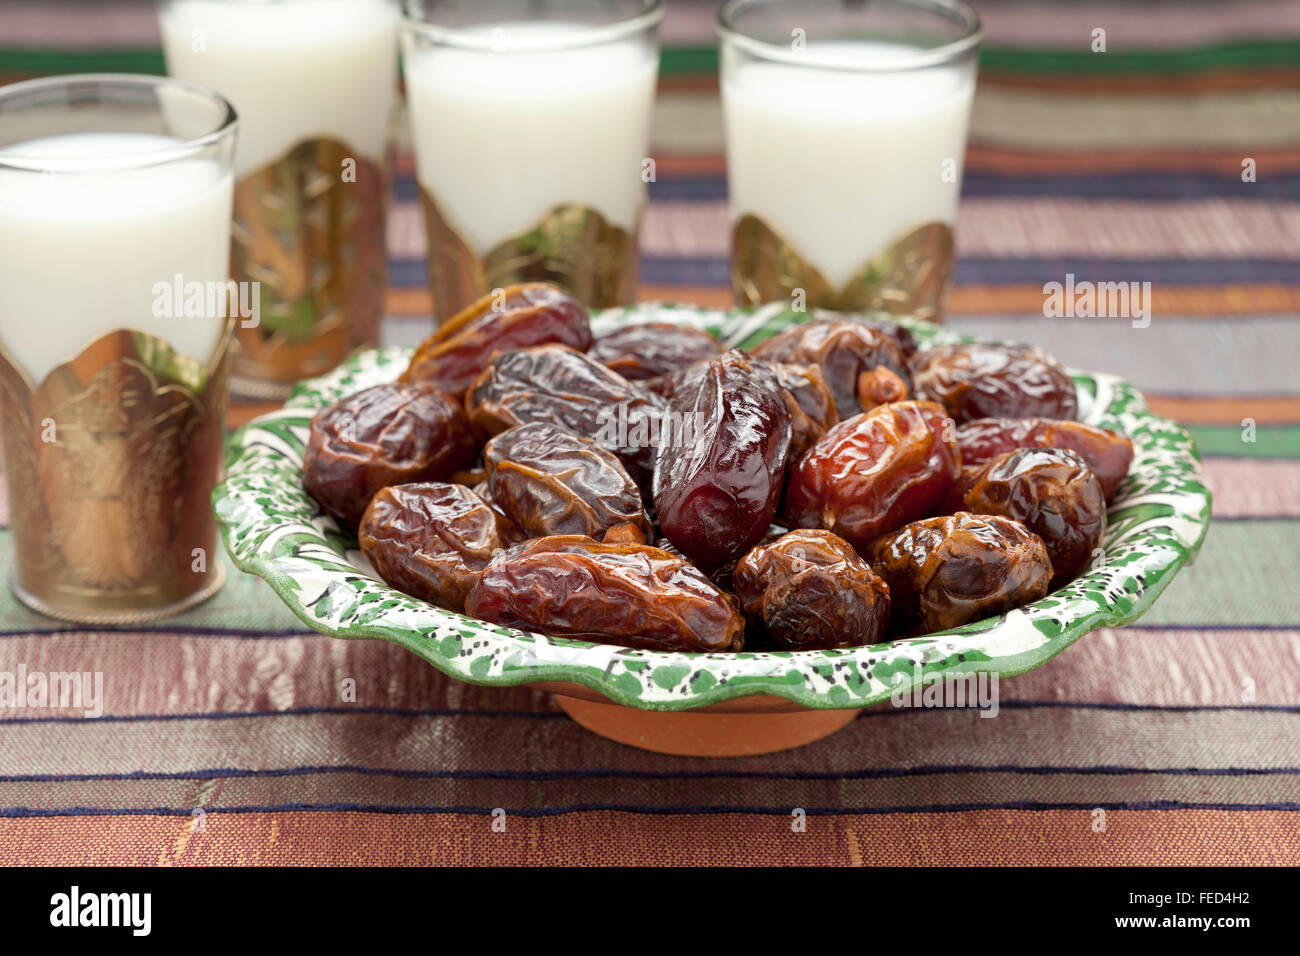 Milk and dates meal for Iftar meal Stock Photo